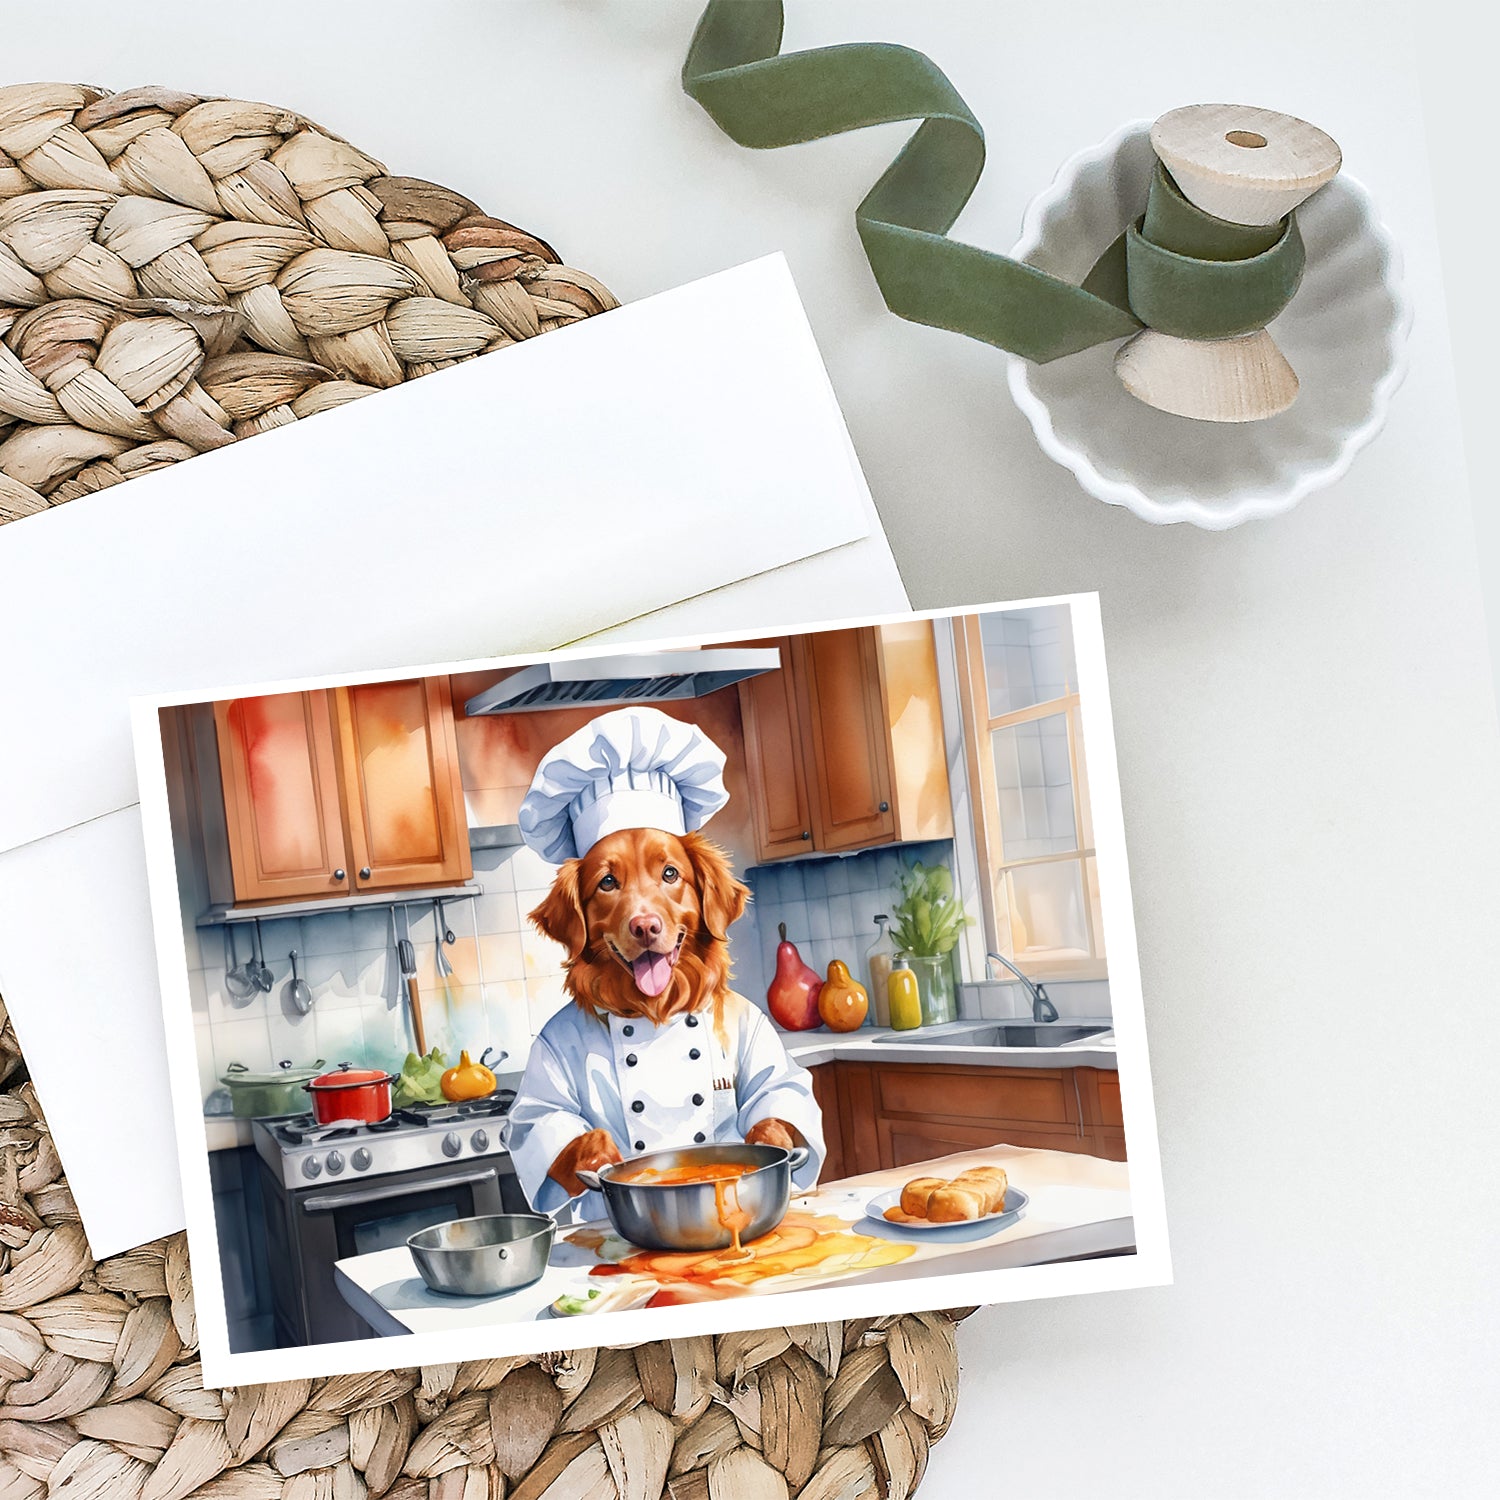 Buy this Nova Scotia Duck Tolling Retriever The Chef Greeting Cards Pack of 8